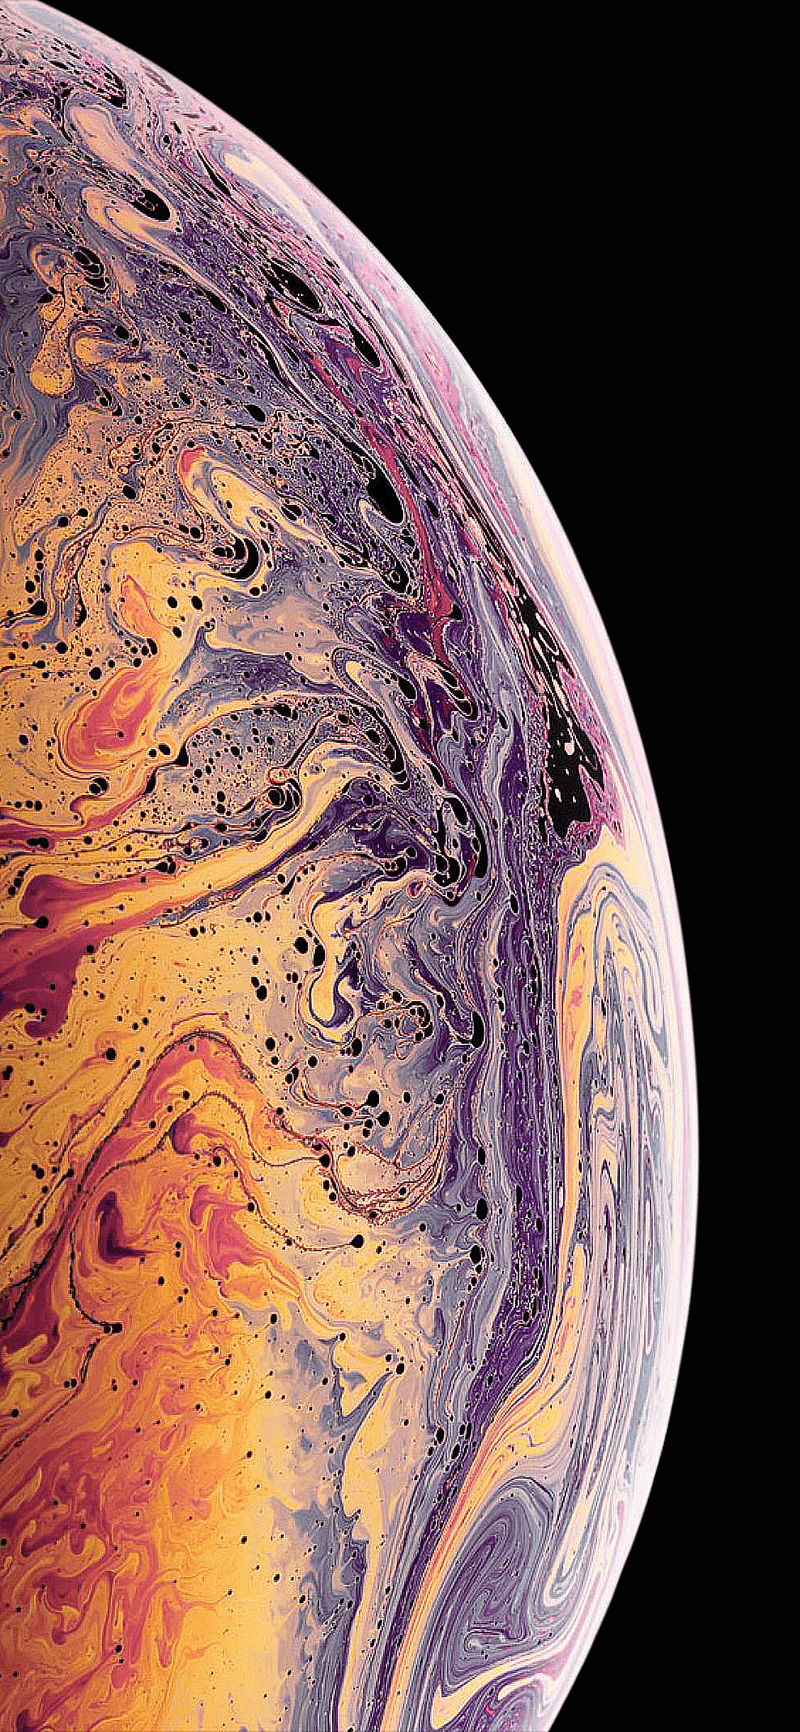 Download Original iPhone XS Max, XS and XR Wallpapers